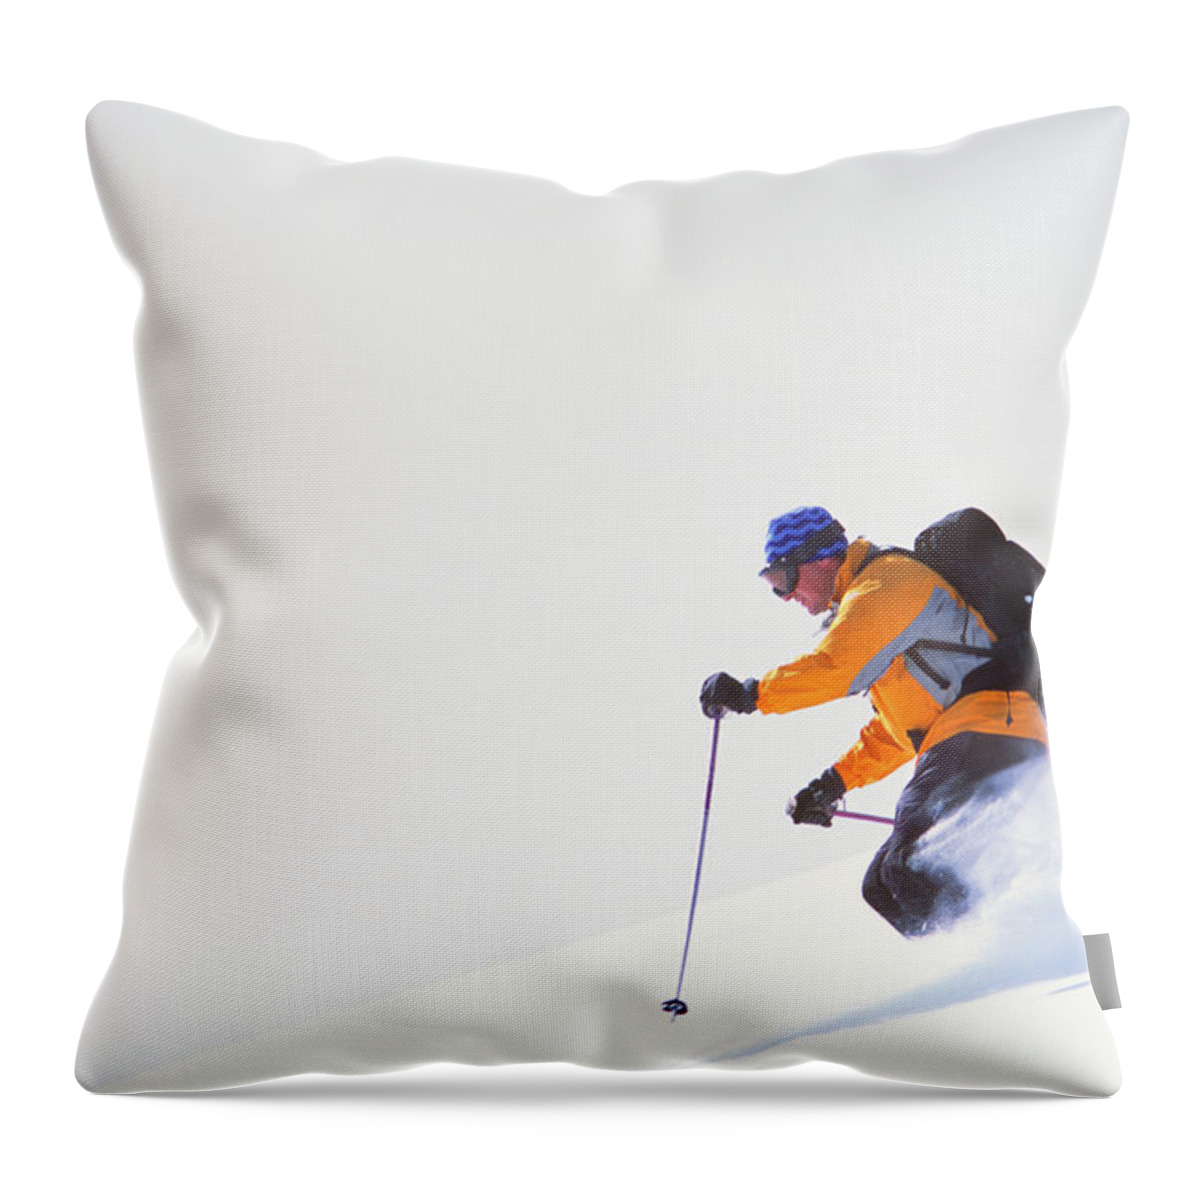 Skiing Throw Pillow featuring the photograph Solo Male Skiing In Powder #1 by Heath Korvola